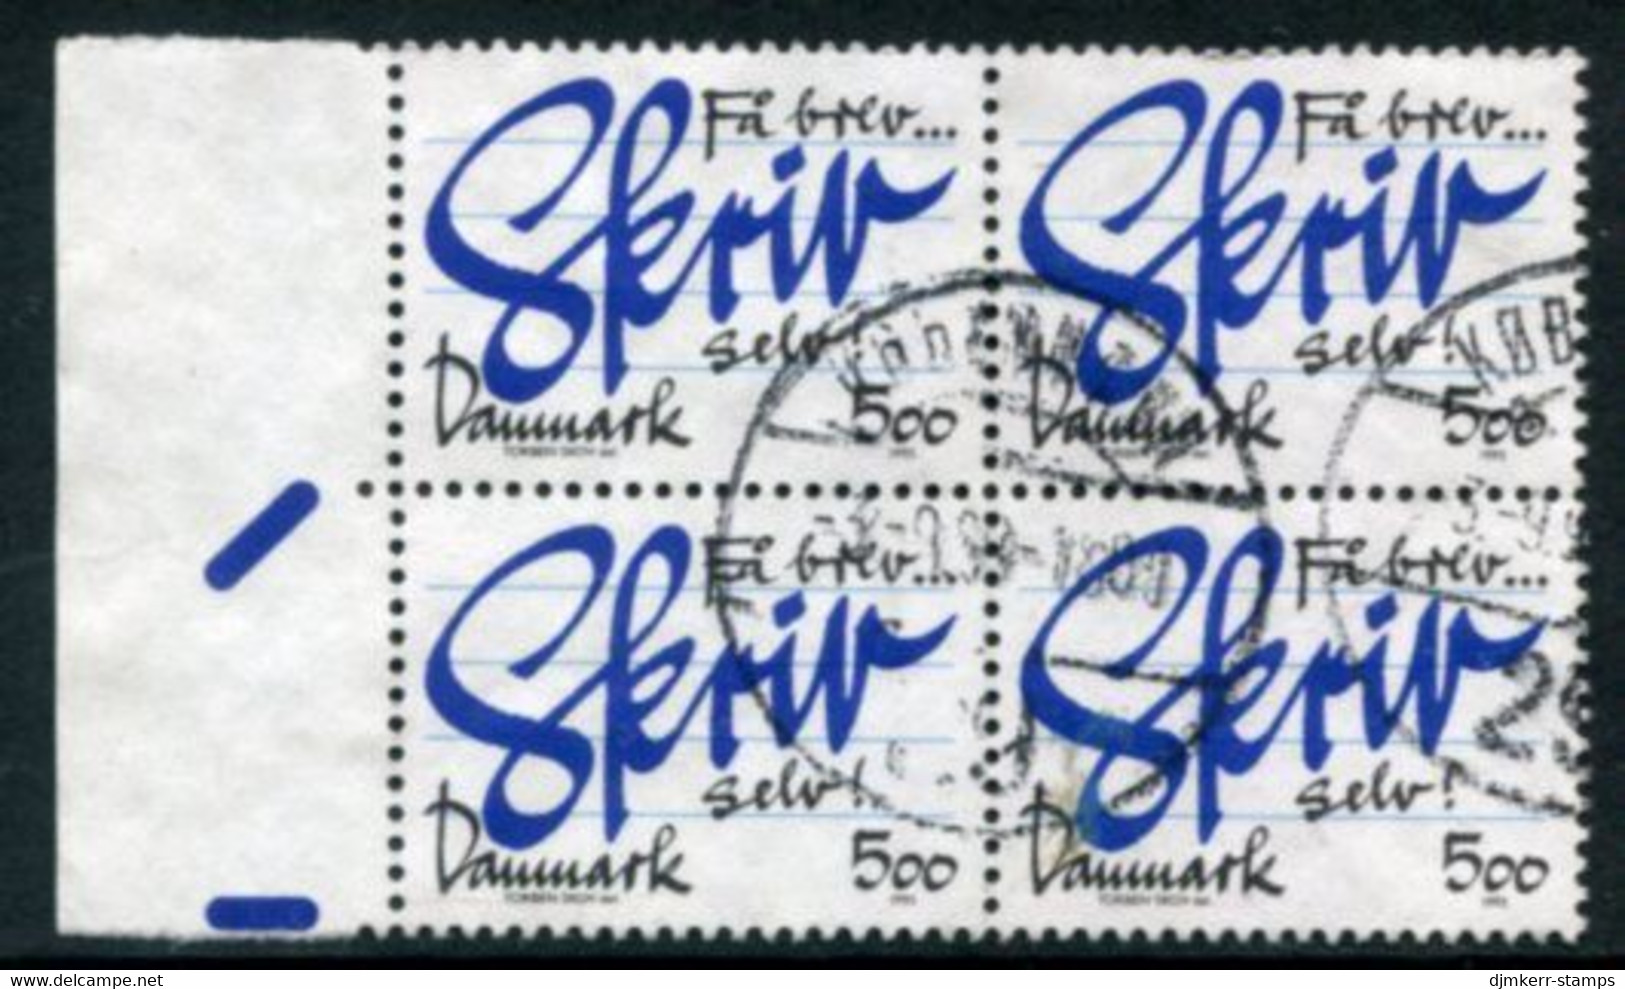 DENMARK 1993 Letter-writing Campaign Block Of 4 Used. Michel 1062 - Usado